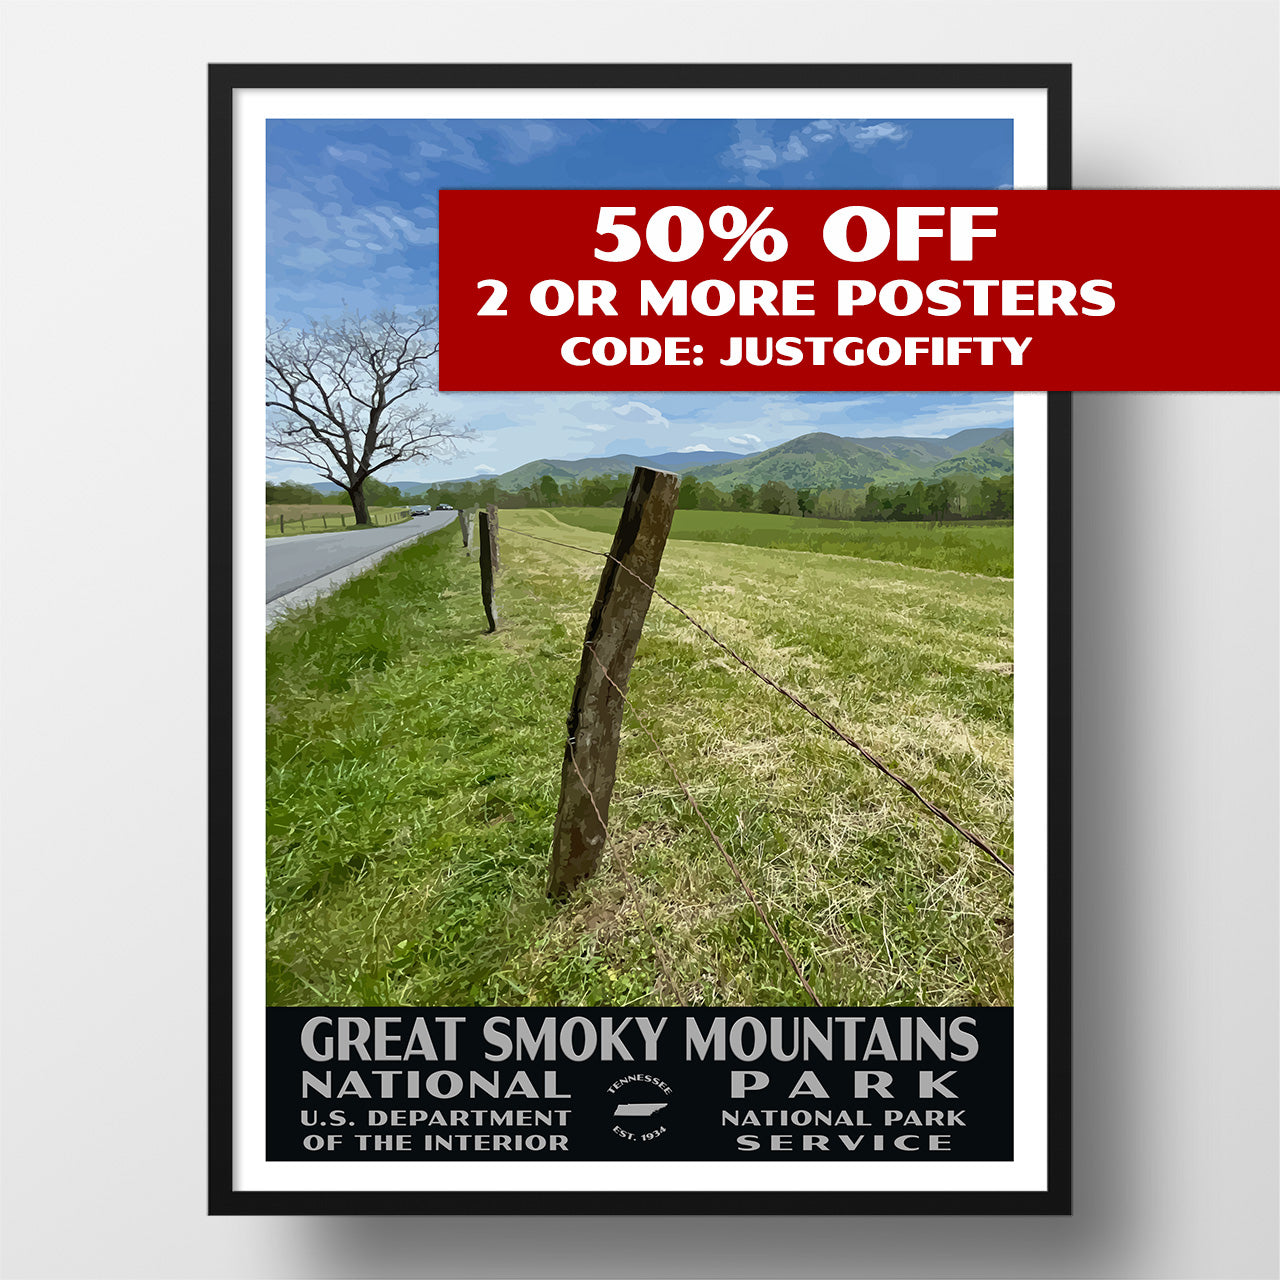 Great Smoky Mountains National Park Poster-WPA (Cades Cove with Road)